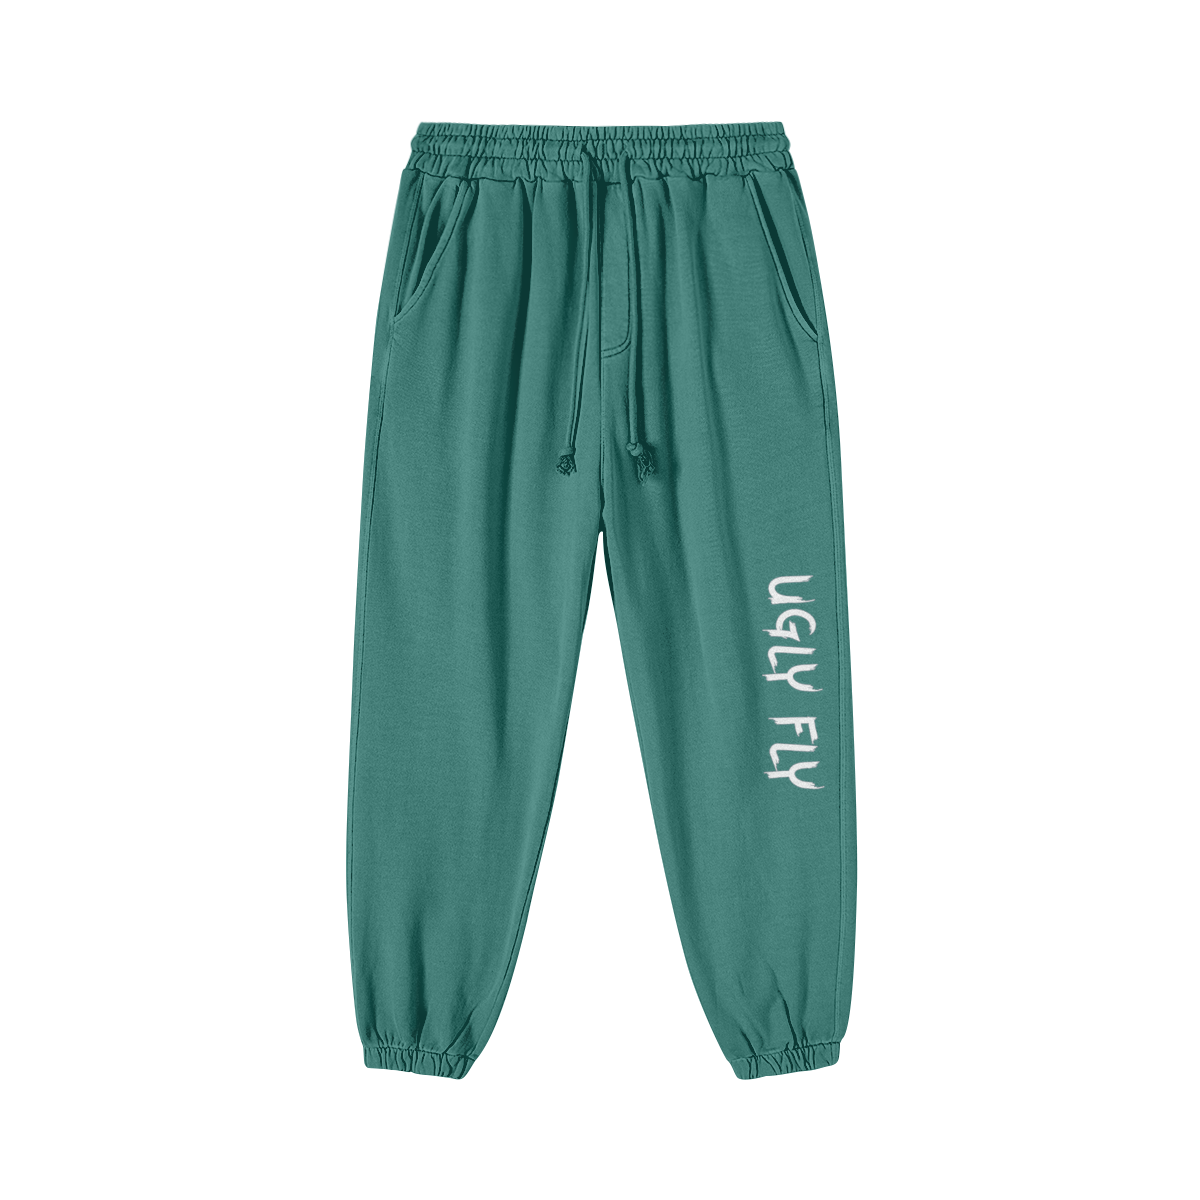 Wintergreen Dream - Ugly Fly Unisex Super Heavyweight Washed Baggy Sweatpants - unisex sweatpants at TFC&H Co.